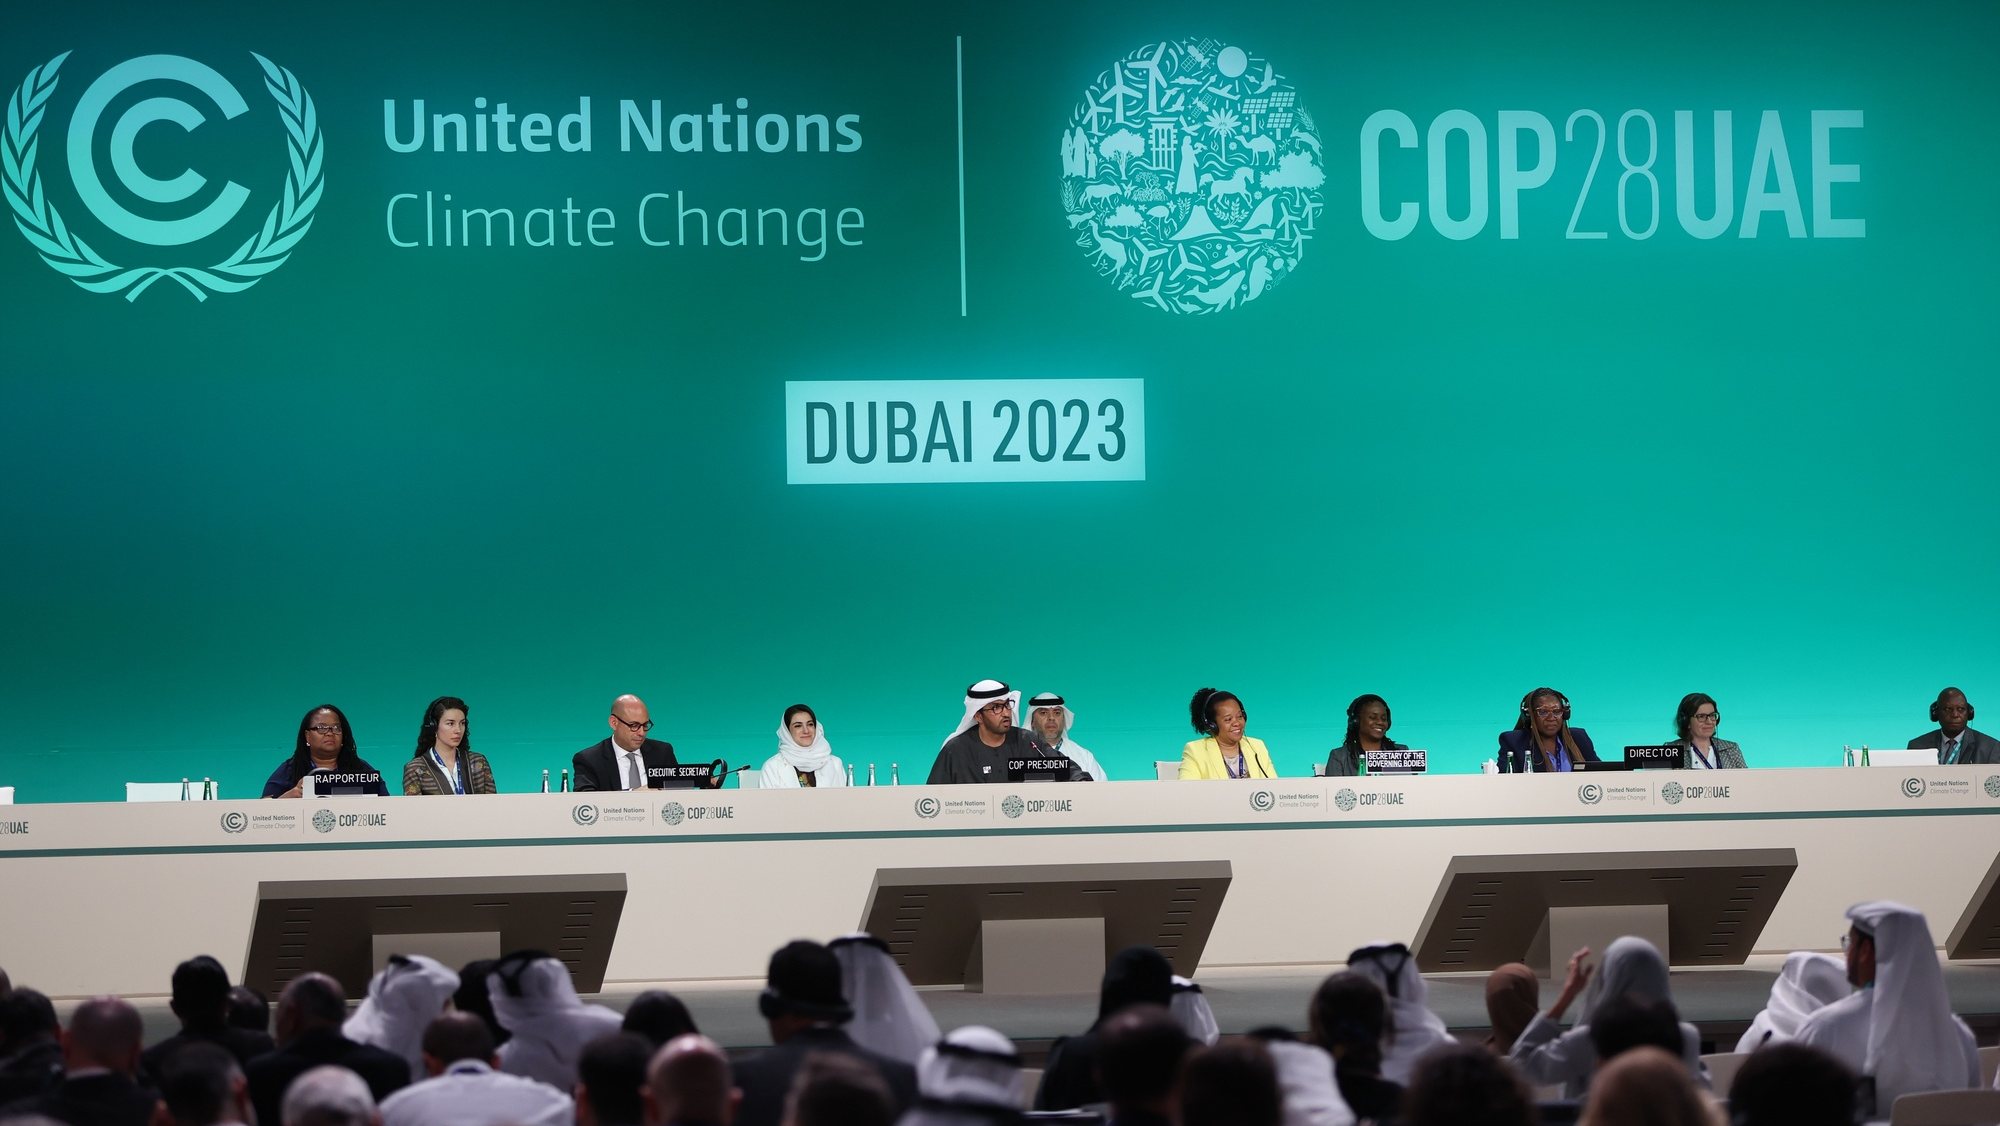 epa11023161 President of COP28 and UAE&#039;s Minister for Industry and Advanced Technology Dr. Sultan Ahmed Al Jaber (C) attends a session of the 2023 United Nations Climate Change Conference (COP28), in Dubai, United Arab Emirates, 11 December 2023. The 2023 United Nations Climate Change Conference (COP28), runs from 30 November to 12 December, and is expected to host one of the largest number of participants in the annual global climate conference as over 70,000 estimated attendees, including the member states of the UN Framework Convention on Climate Change (UNFCCC), business leaders, young people, climate scientists, Indigenous Peoples and other relevant stakeholders will attend.  EPA/ALI HAIDER